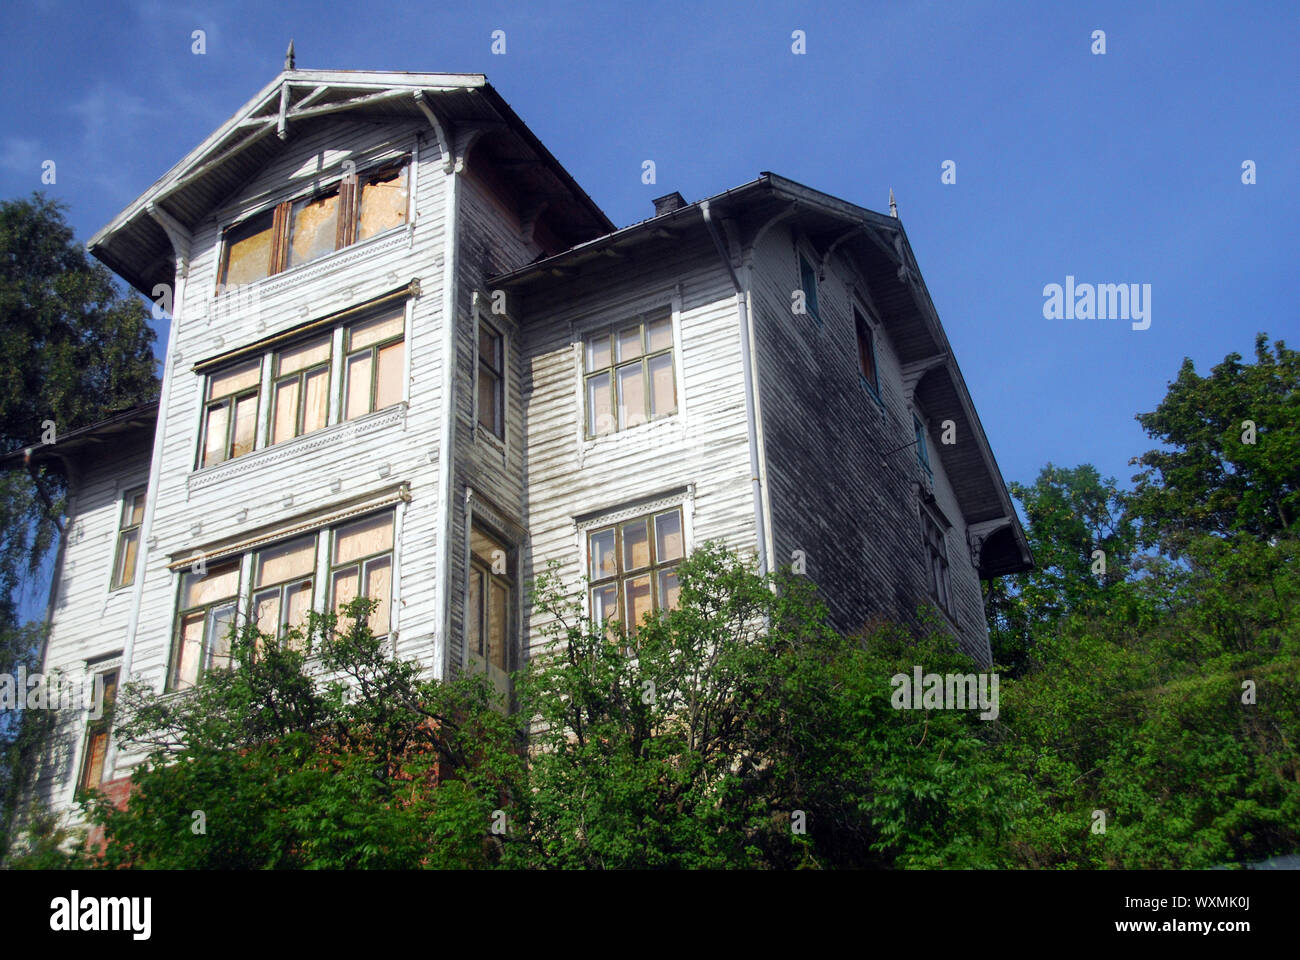 A traditional wooden house in nature just outside Oslo, Norway Stock Photo